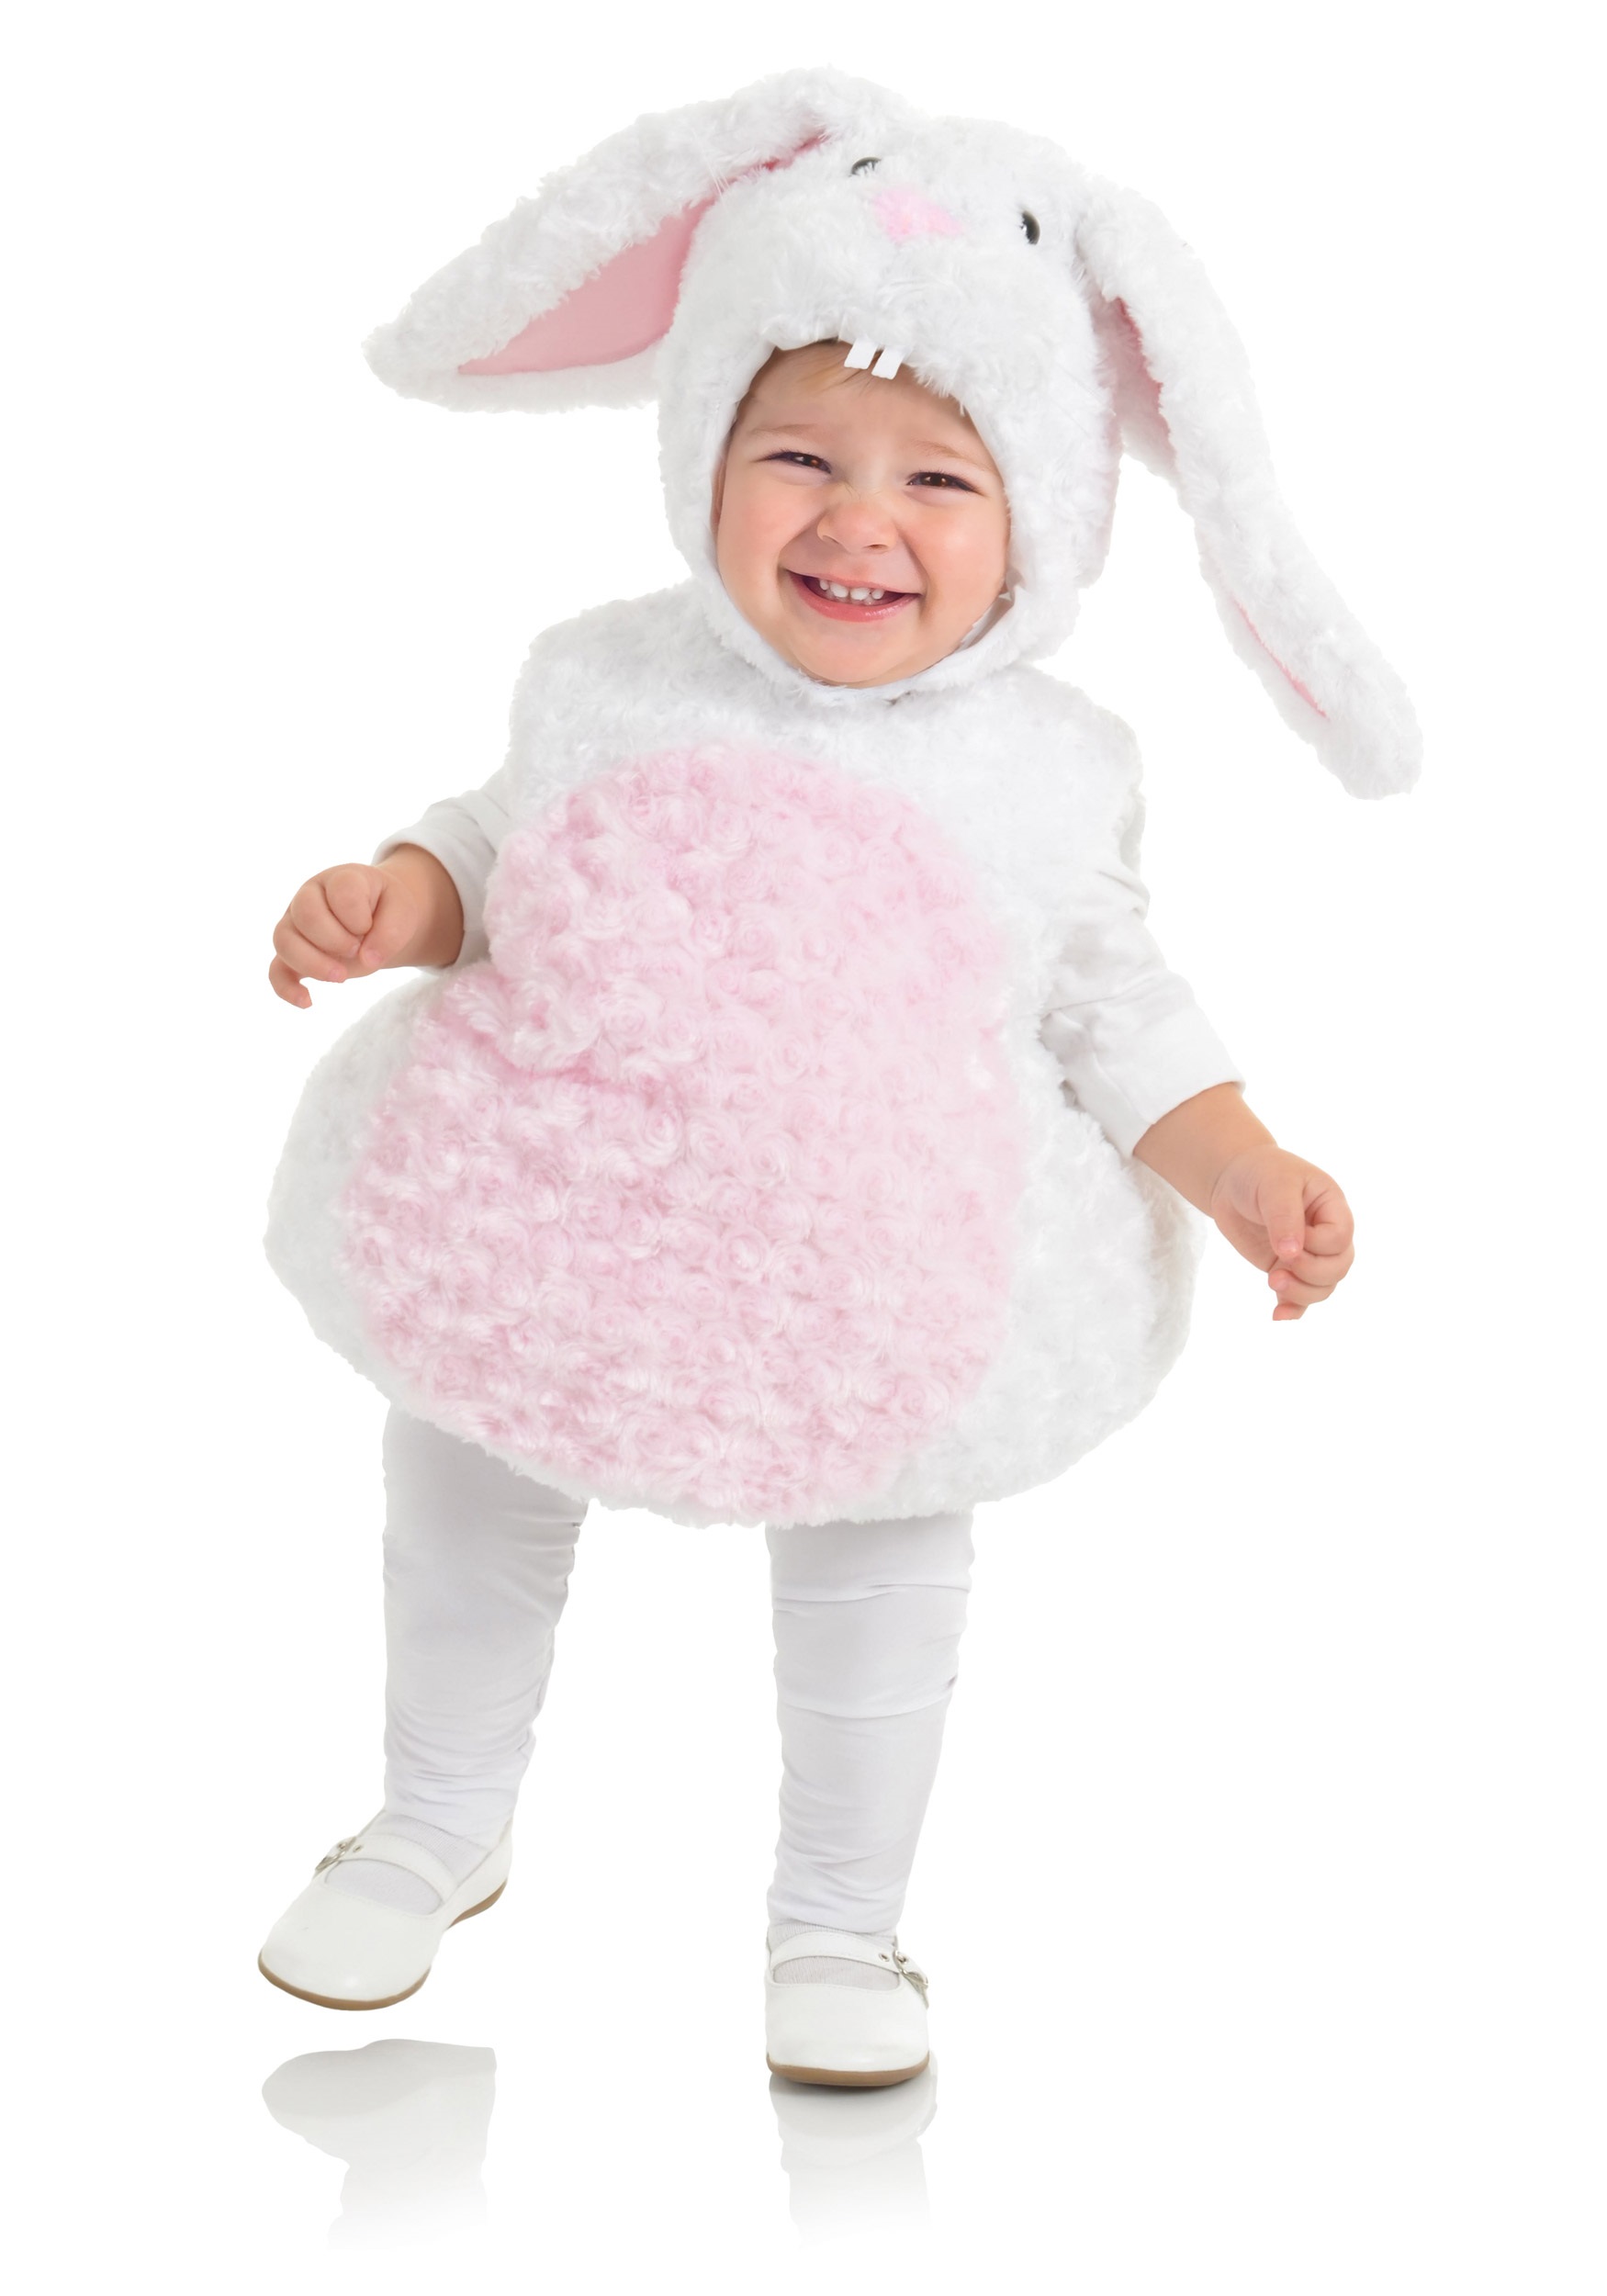 Childrens Bunny Fancy Dress Costume Easter Bunny Rabbit Animal Outfit 1-2 Yrs 